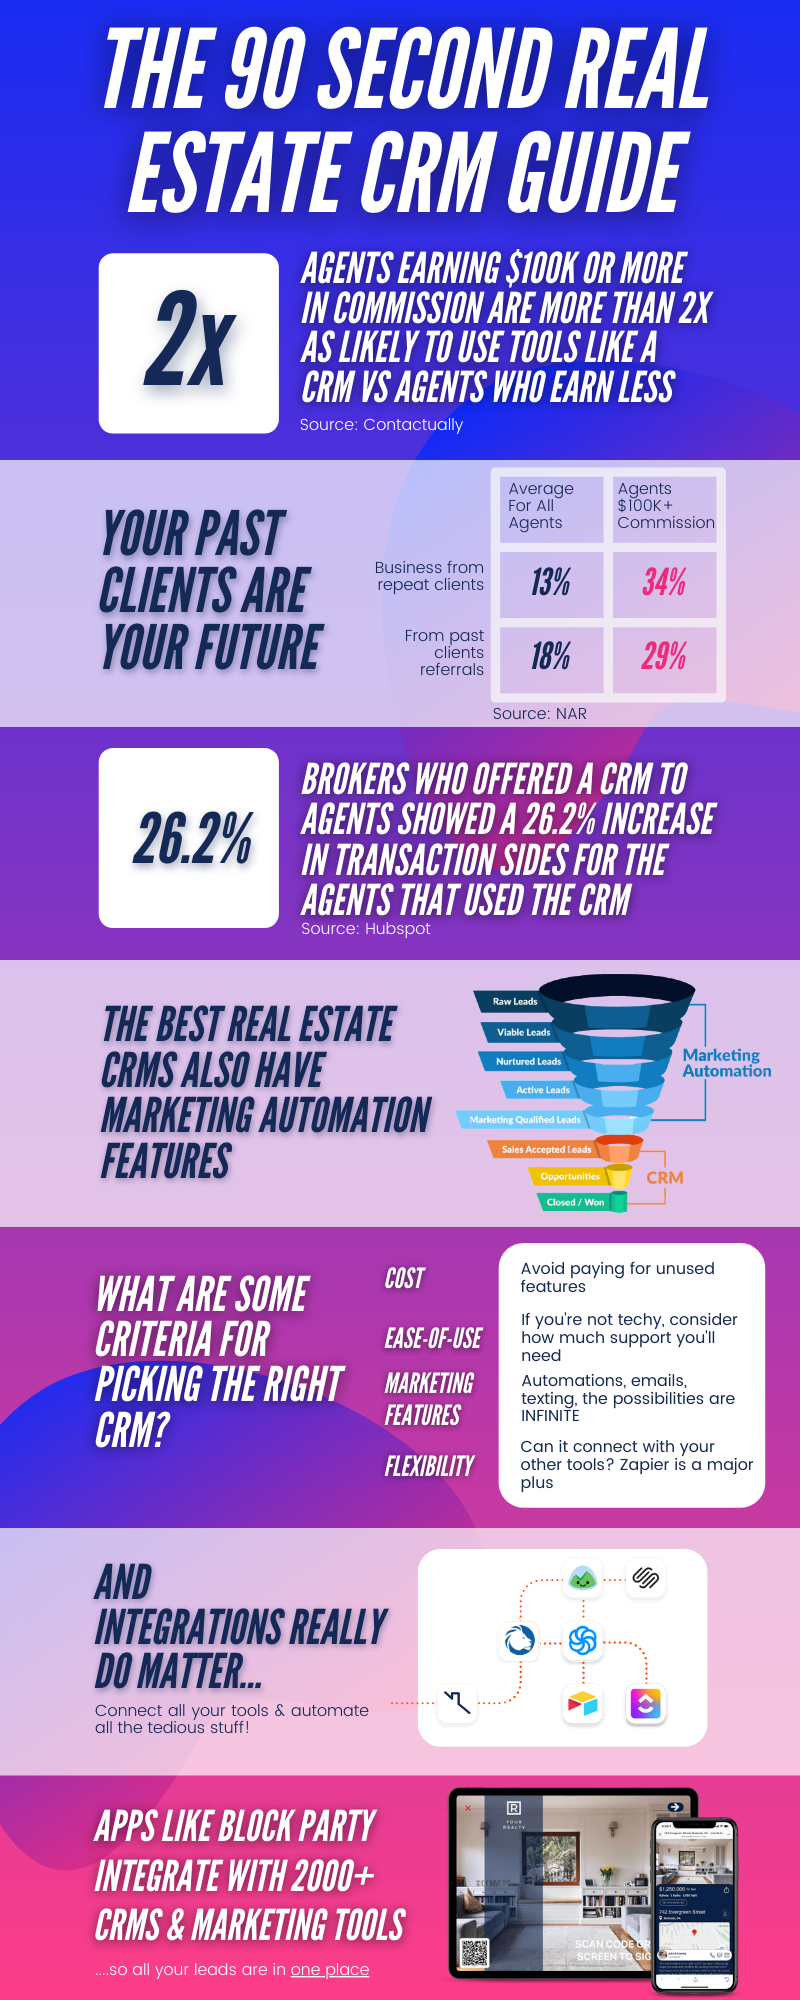 Block Party CRM Guide - infographic